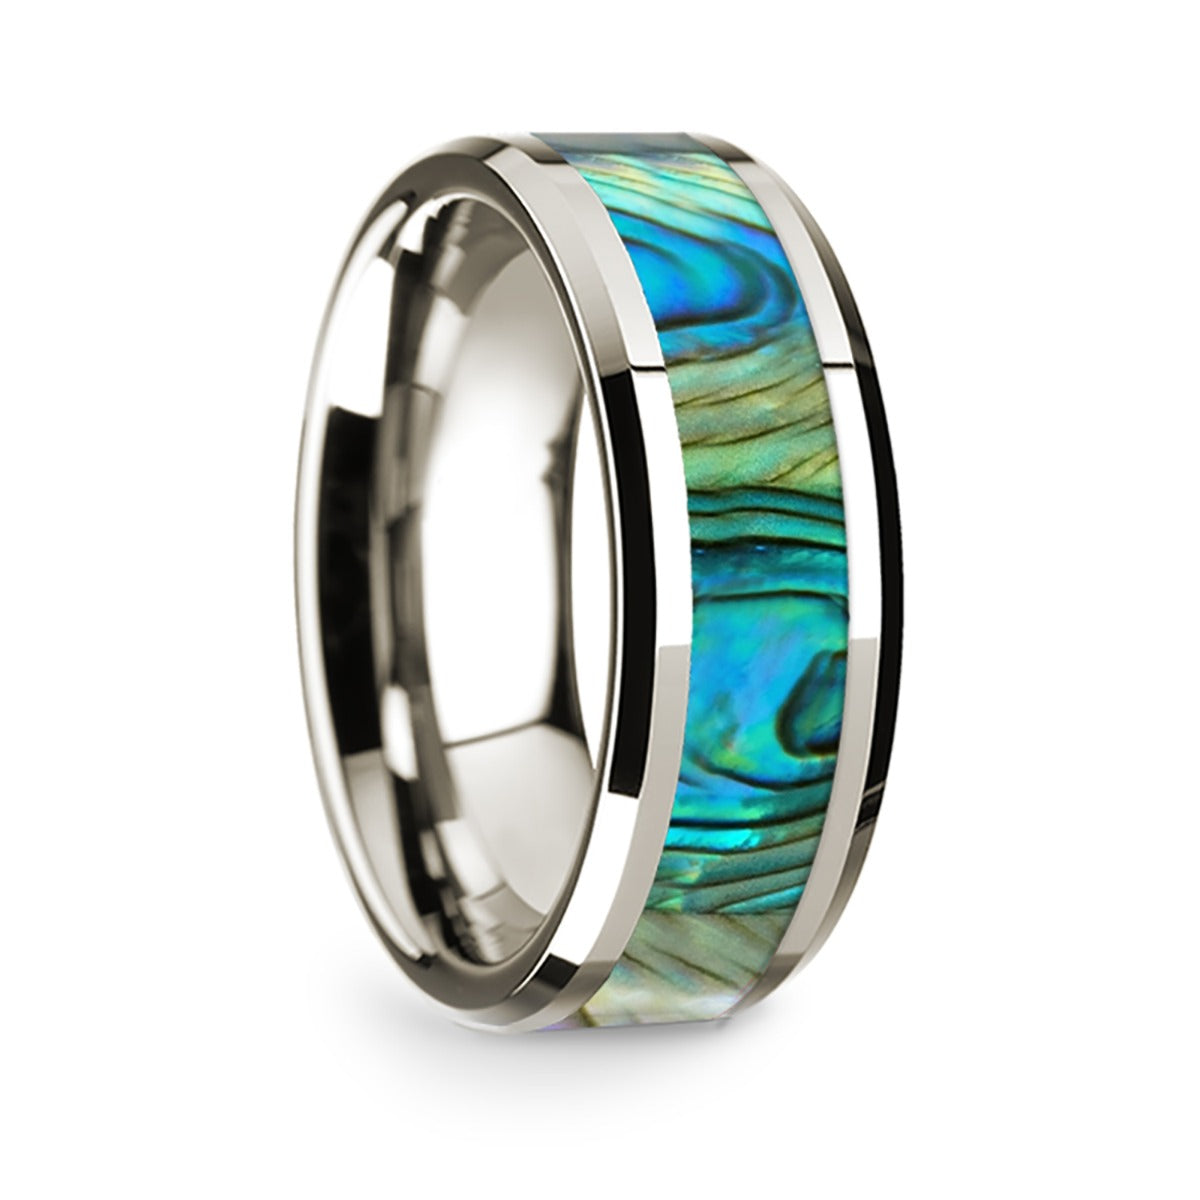 14k White Gold Men's Wedding Band with Mother of Pearl Inlay